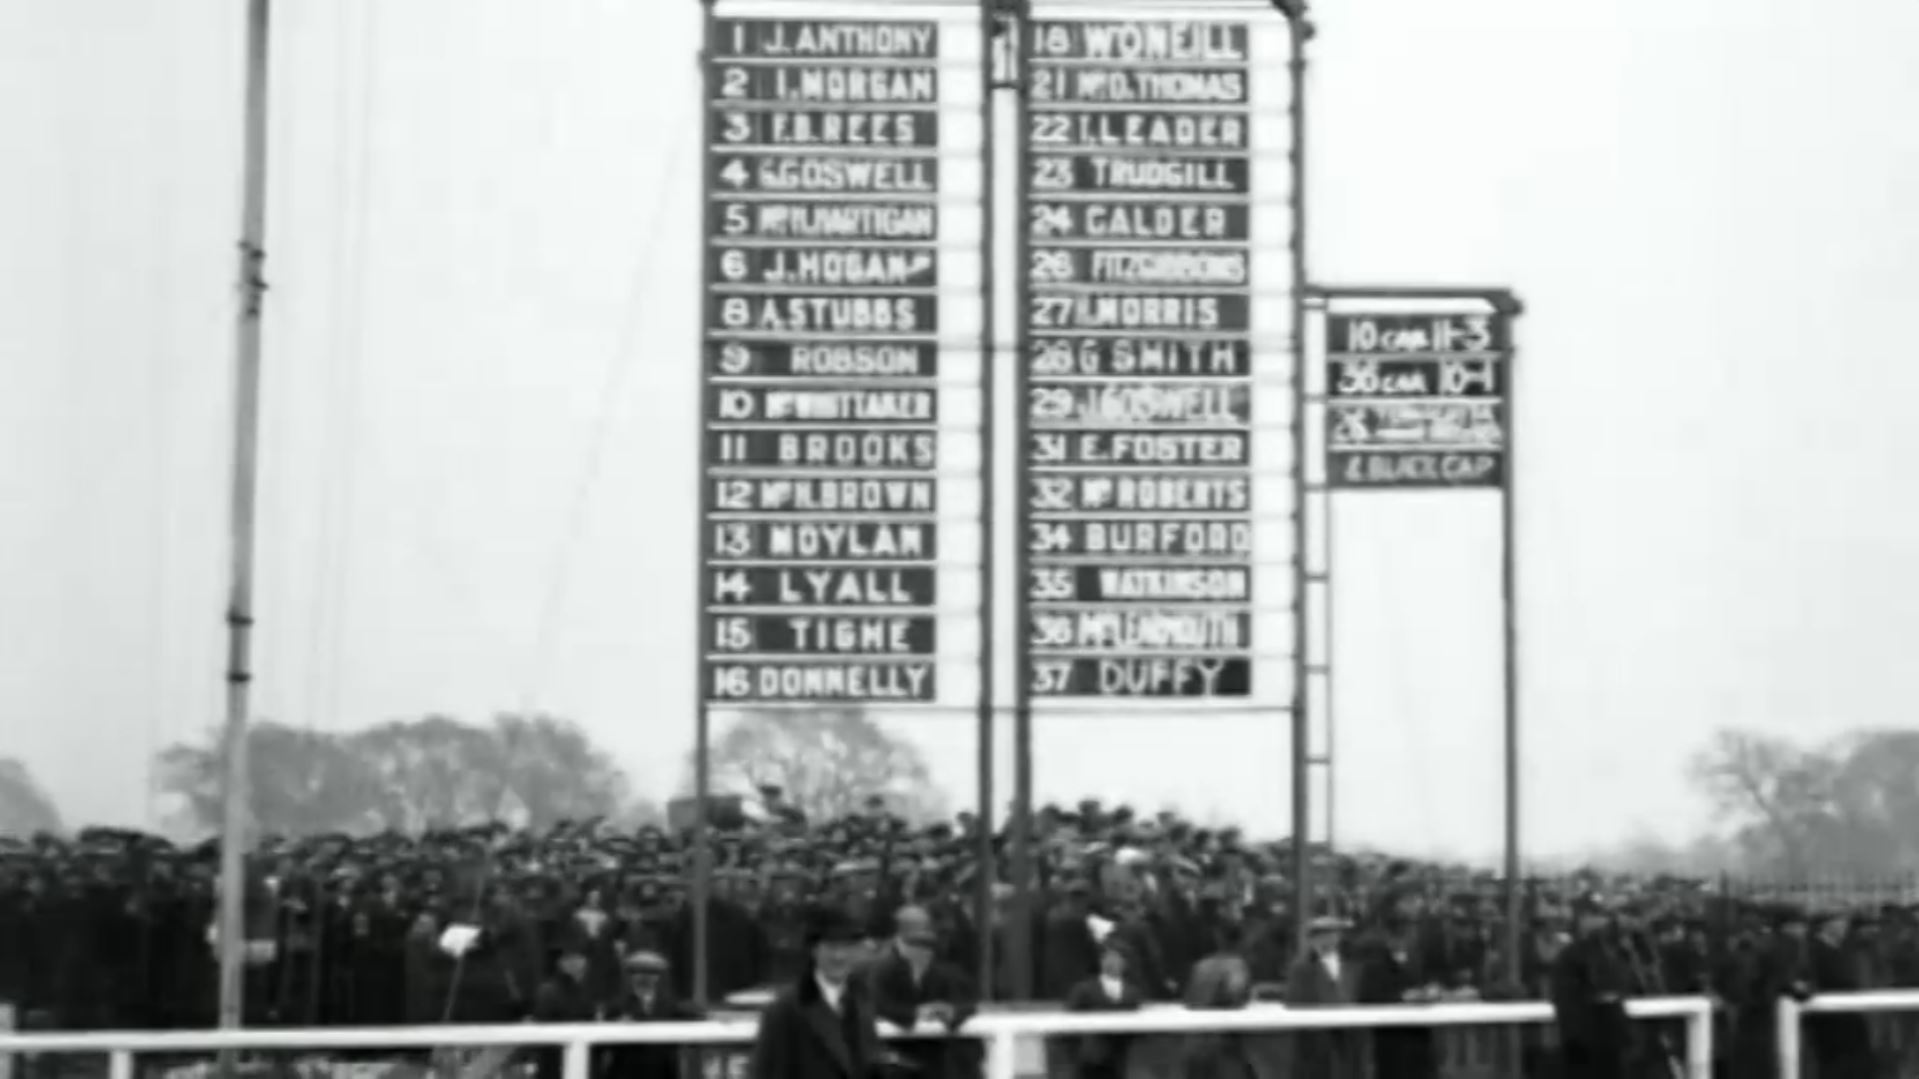 Donnelly Name Board from Aintree Grand National